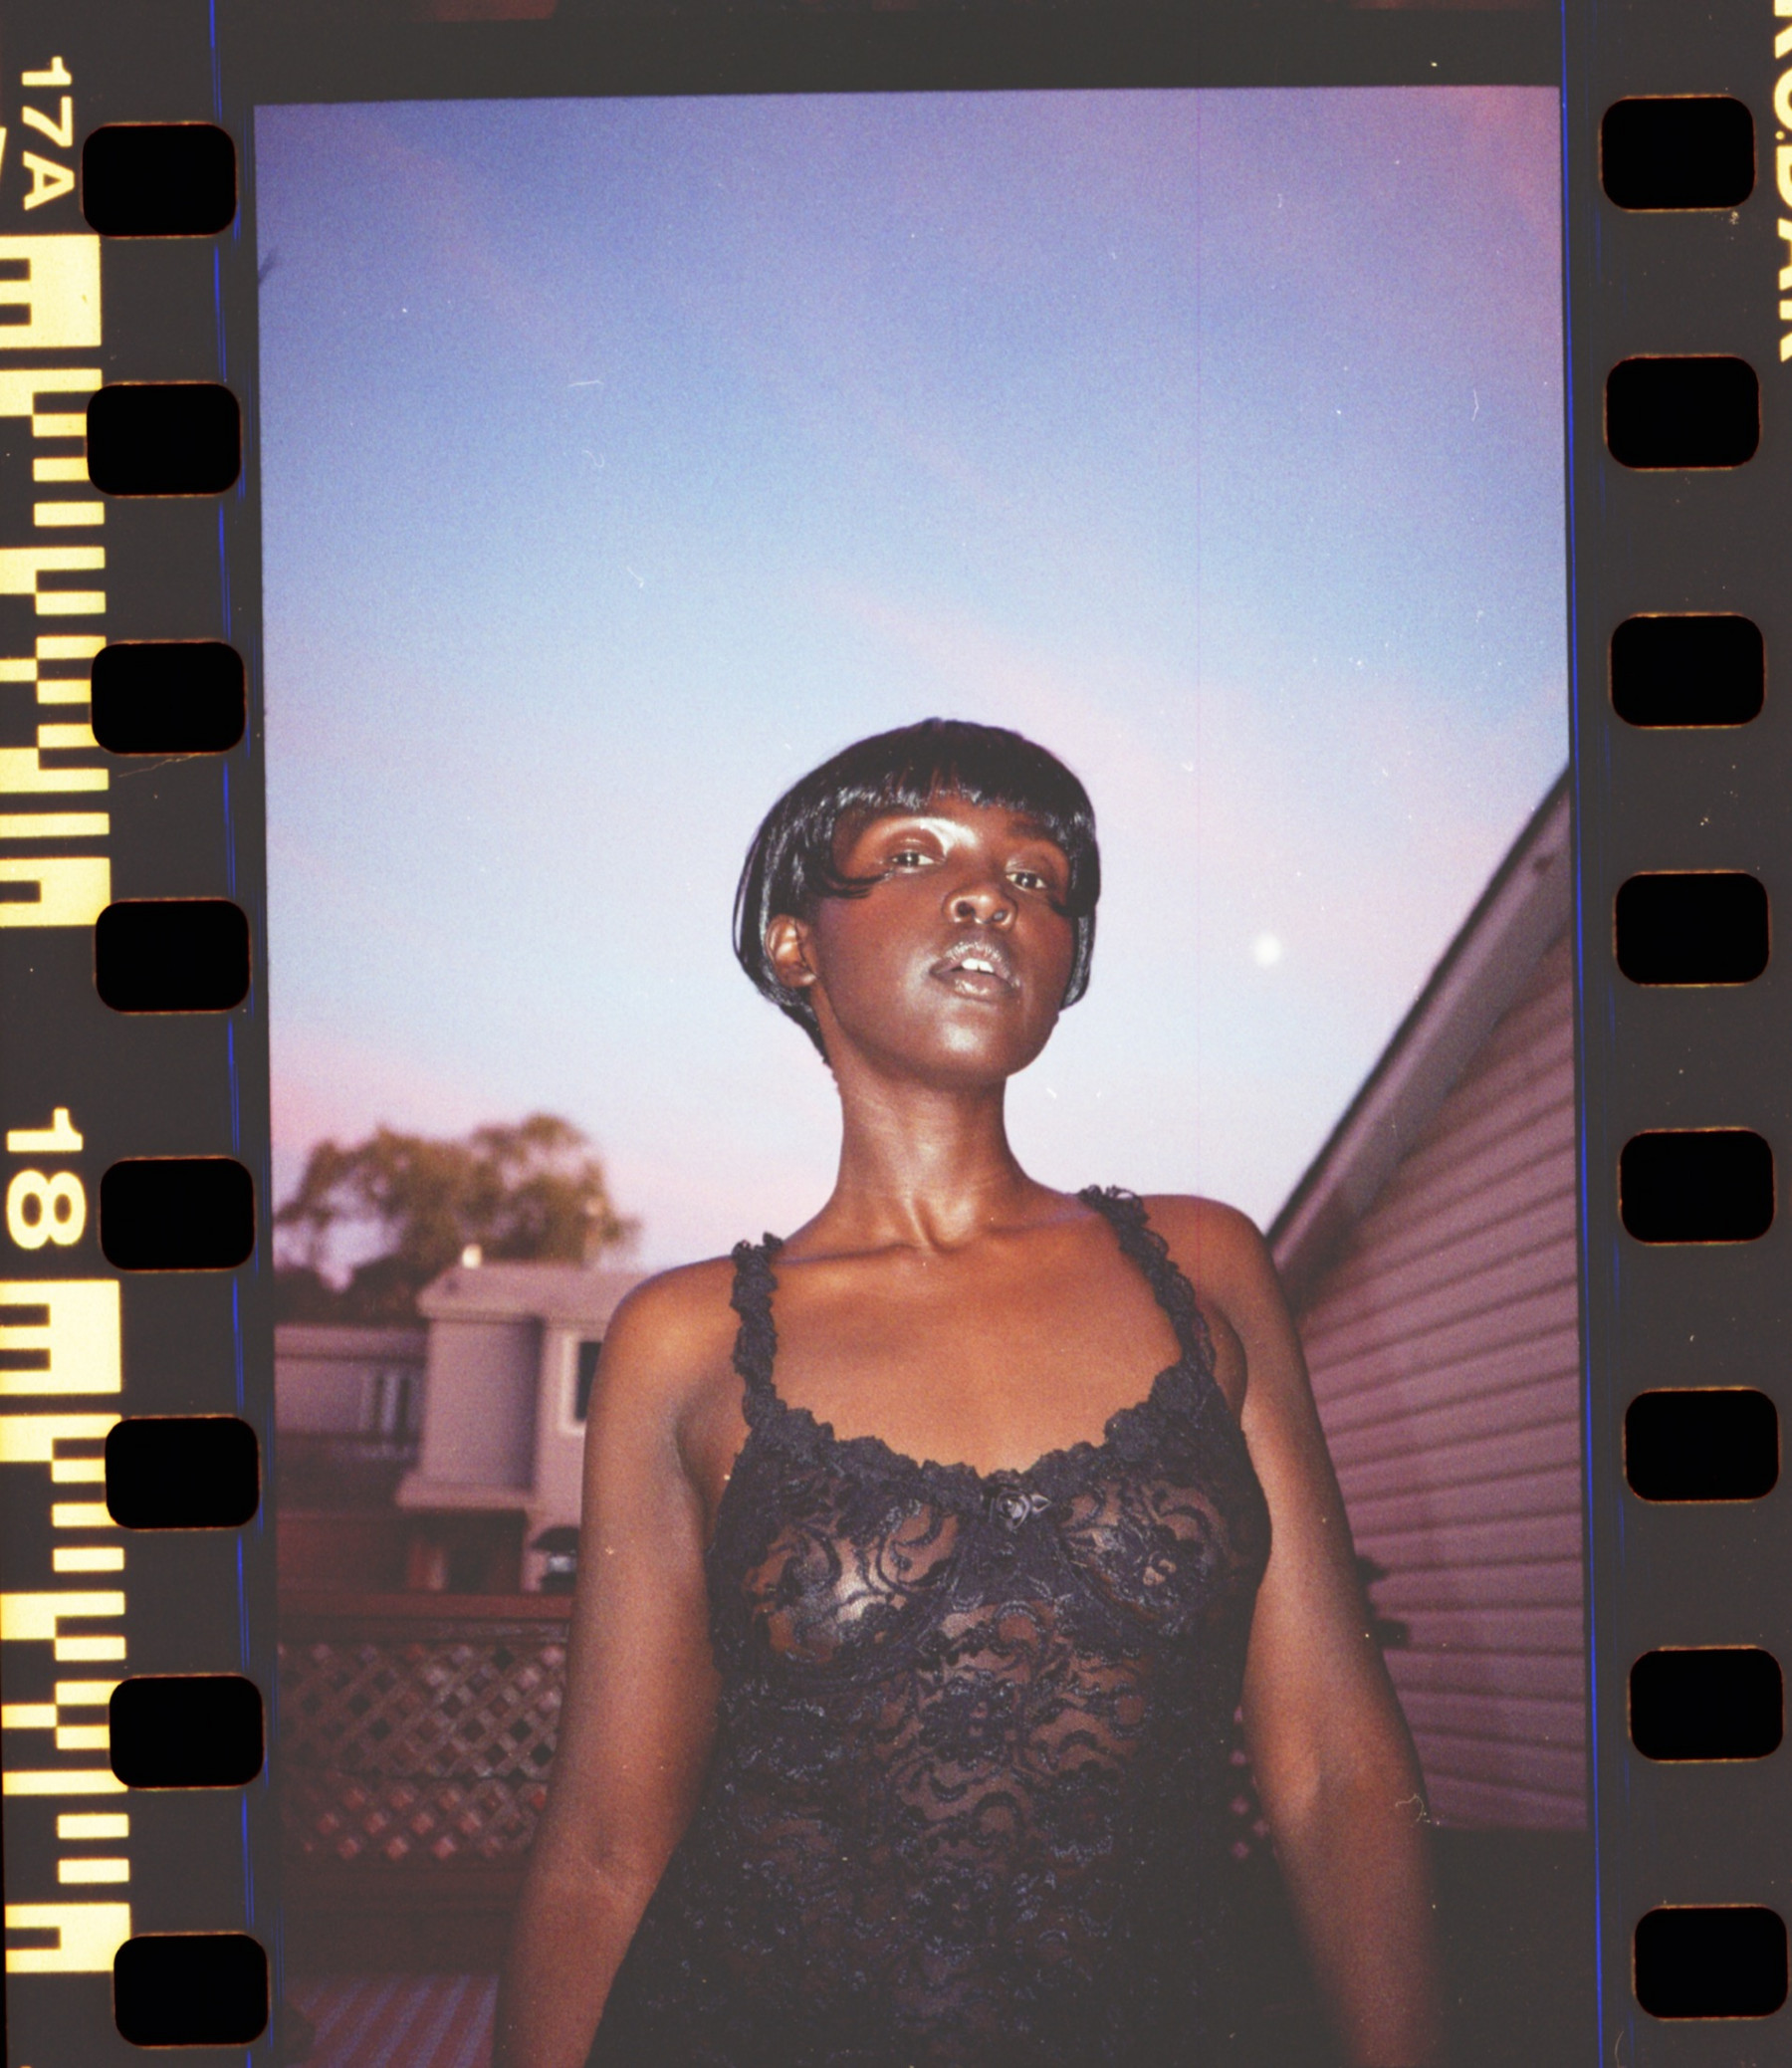 A Black woman whose hair is styled in a short bob stands on a rooftop at twilight, looking down to camera. Flash lights up her face, while the remnants of sunset light up the sky behind her.